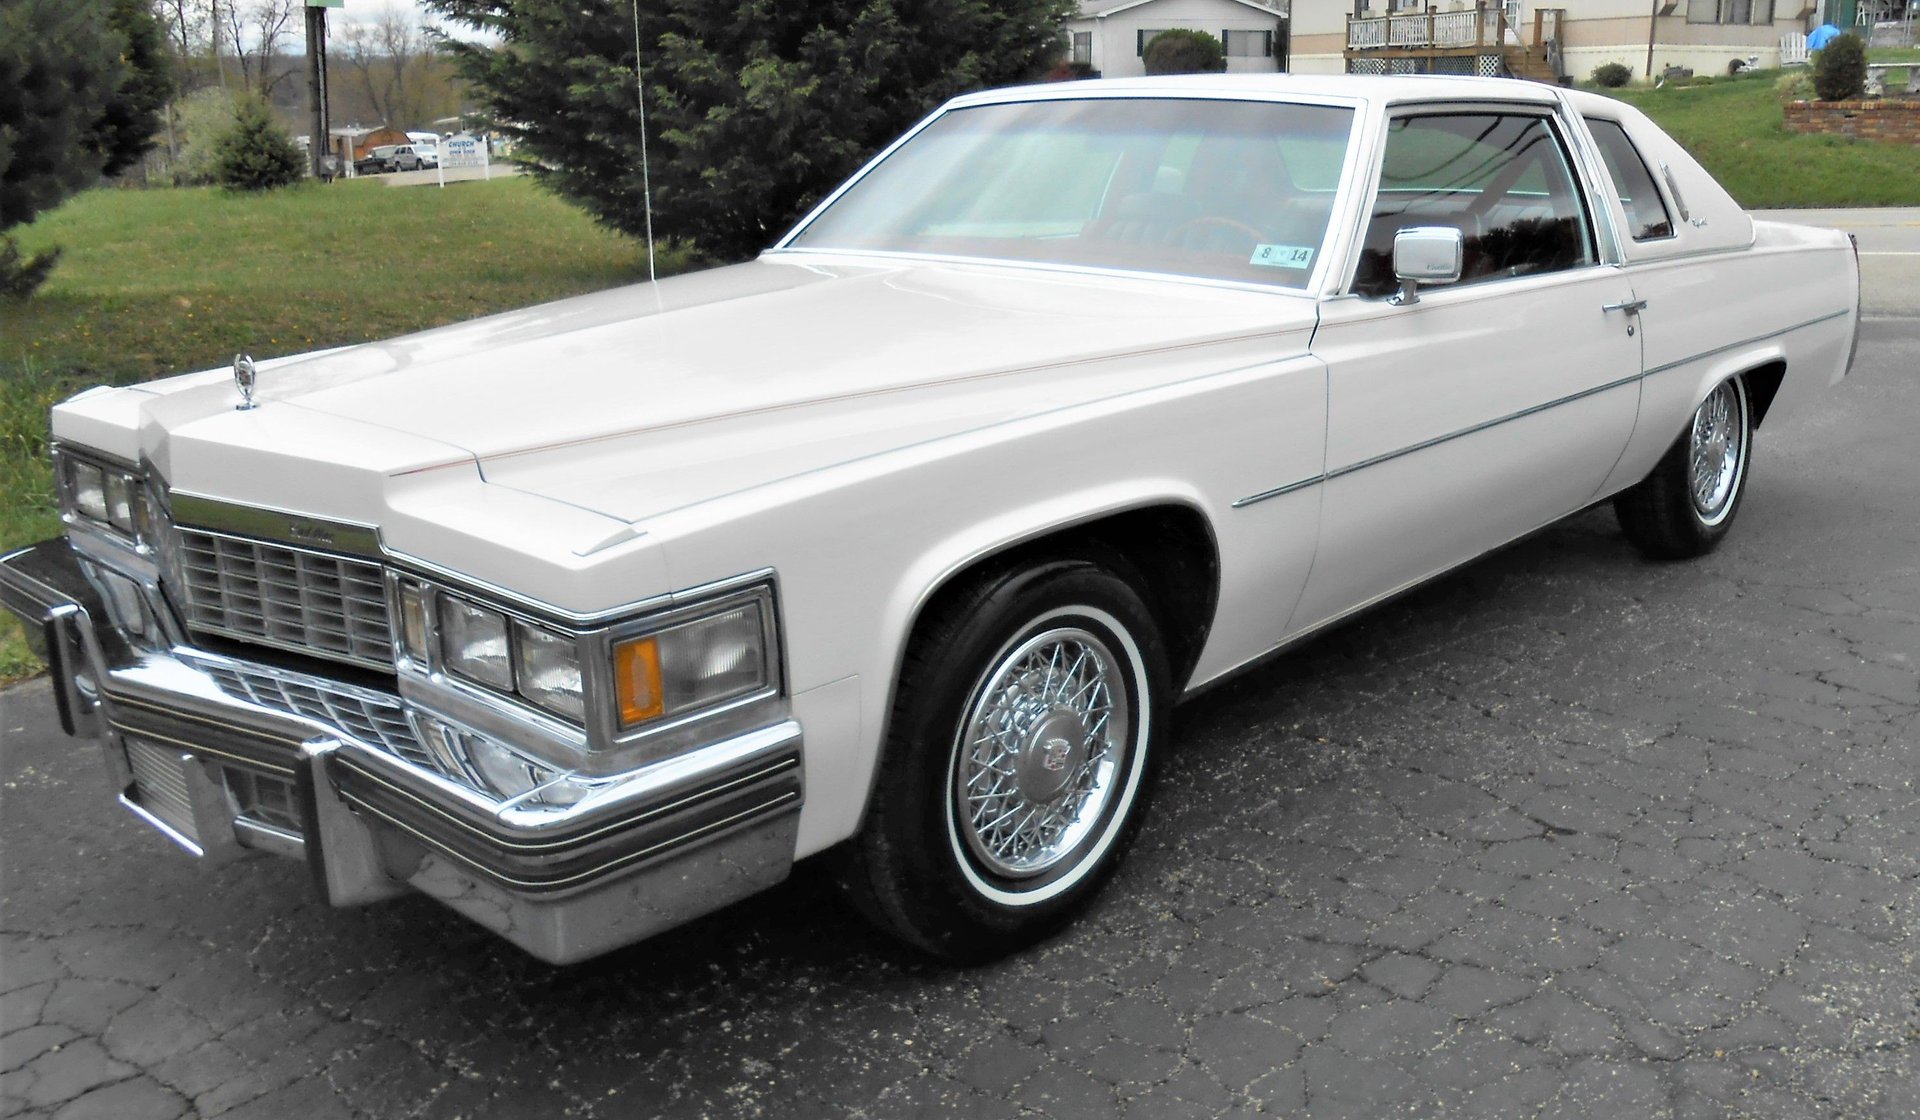 1977 Cadillac Coupe DeVille | GAA Classic Cars